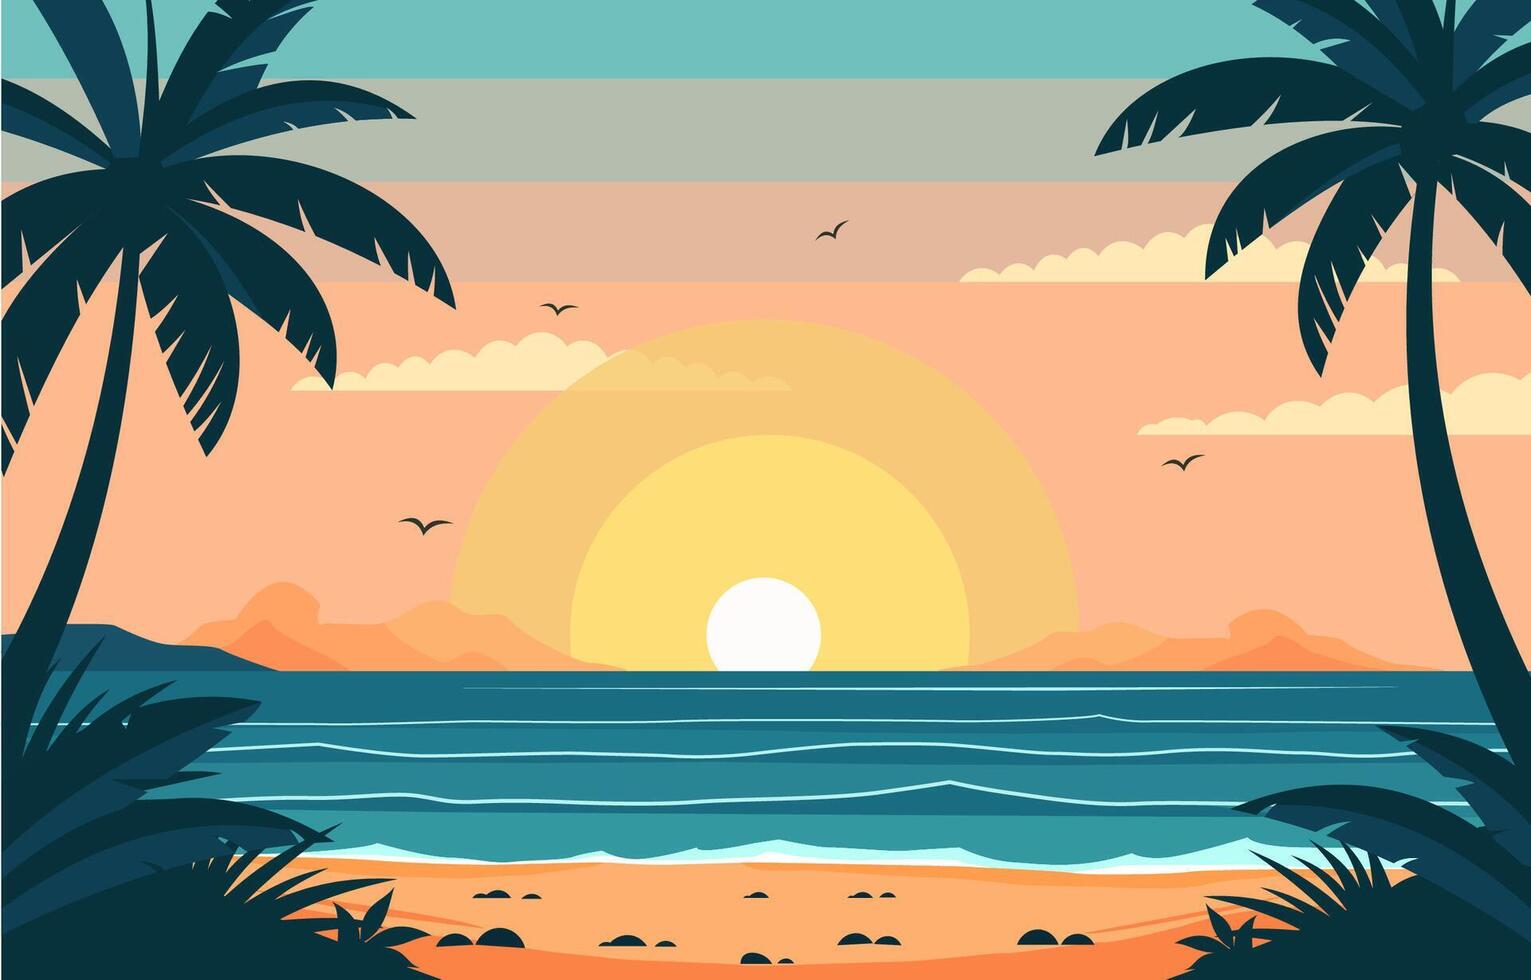 Flat Design of Sea Ocean Landscape at Sunset with Water Waves vector